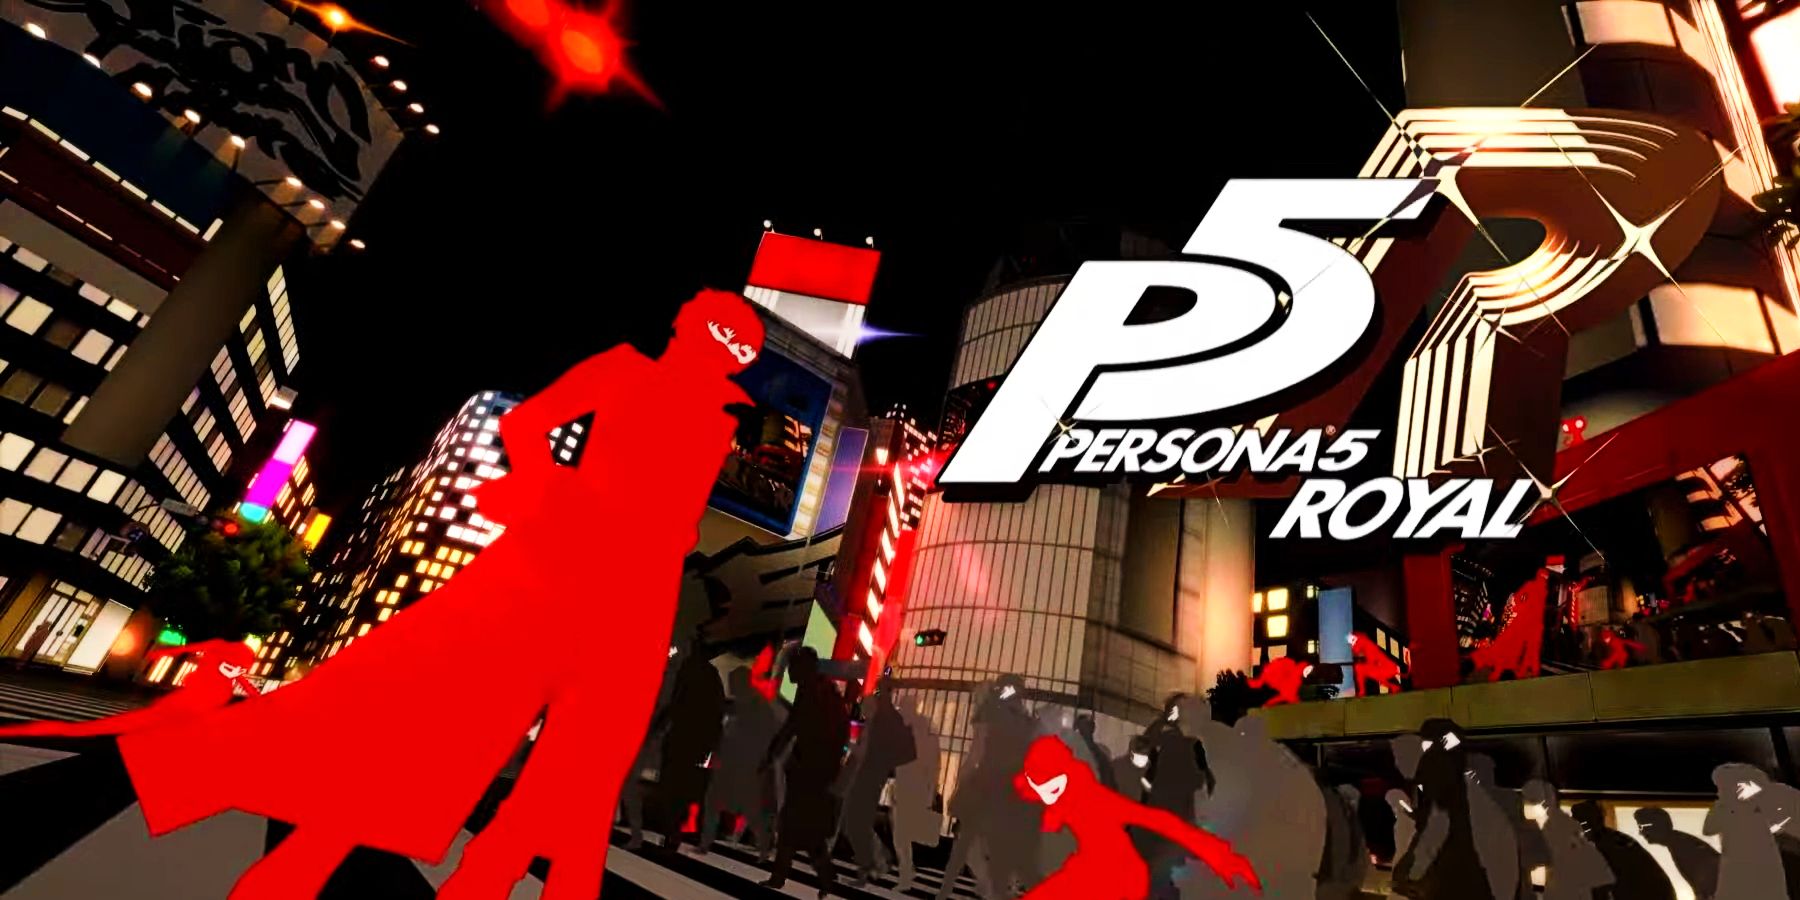 the title screen of Persona 5 Royal